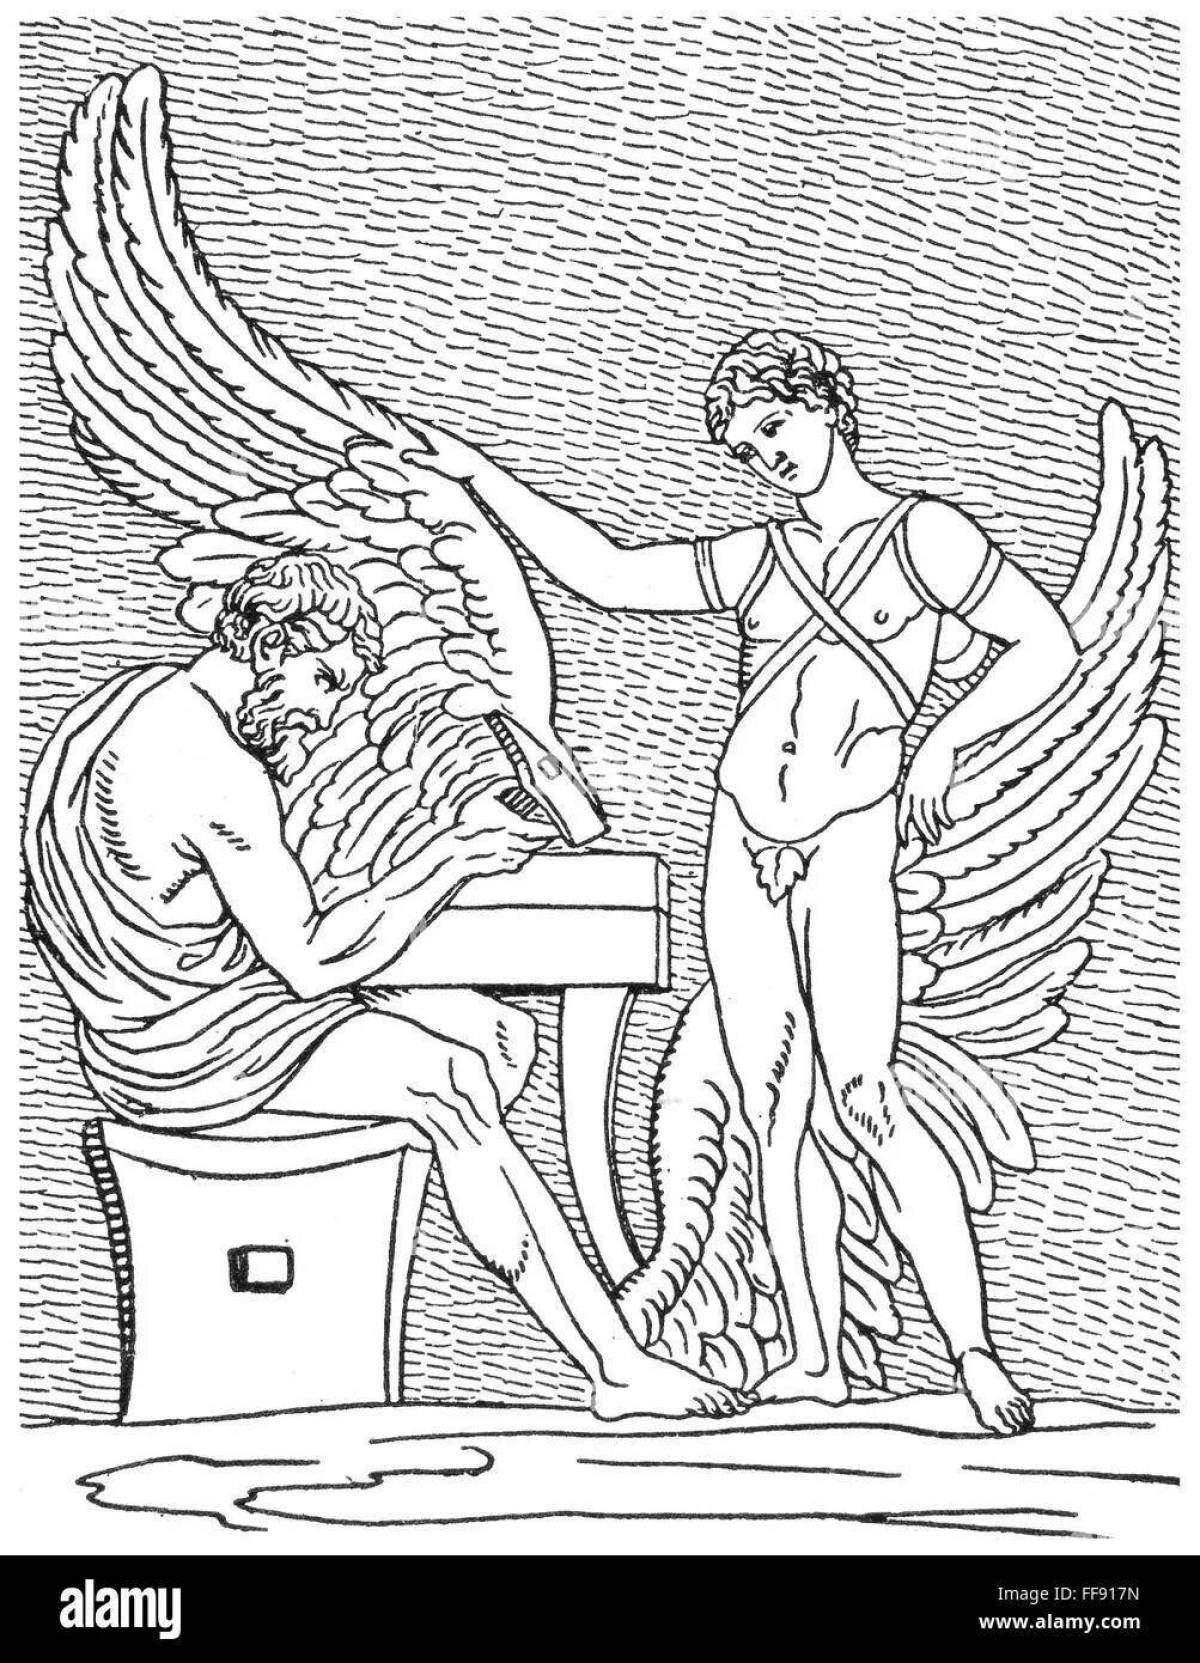 Fabulous Daedalus and Icarus coloring pages